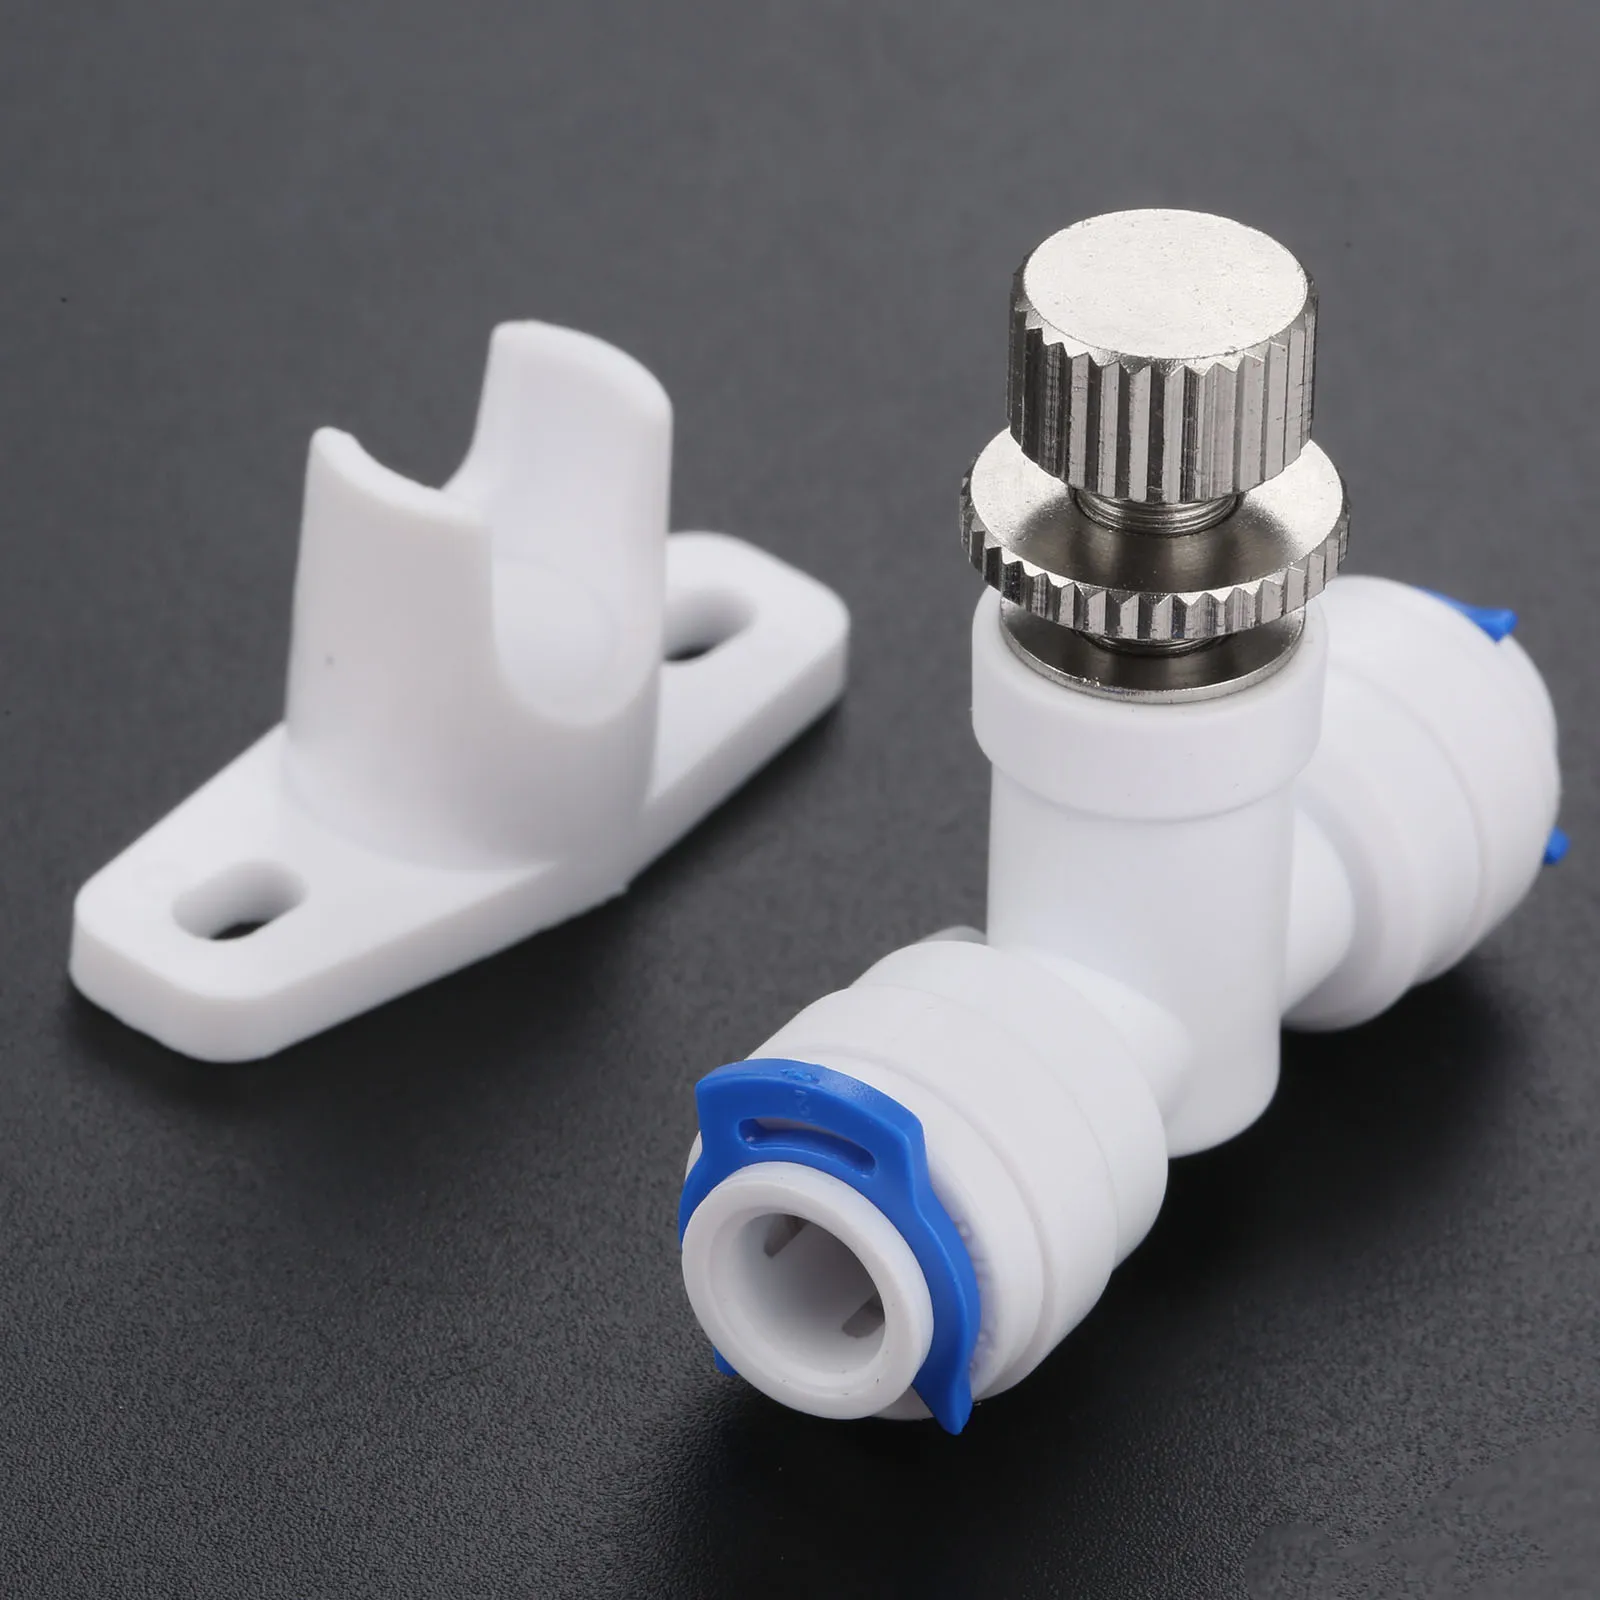 YHMY Tube Connector 10pcs Reverse Osmosis 1/4 Hose RO Water Flow Adjust Valve Regulator Waterflow Control Valve Connector Fitting Water Speed Controller Drip Irrigation Fittings Kit